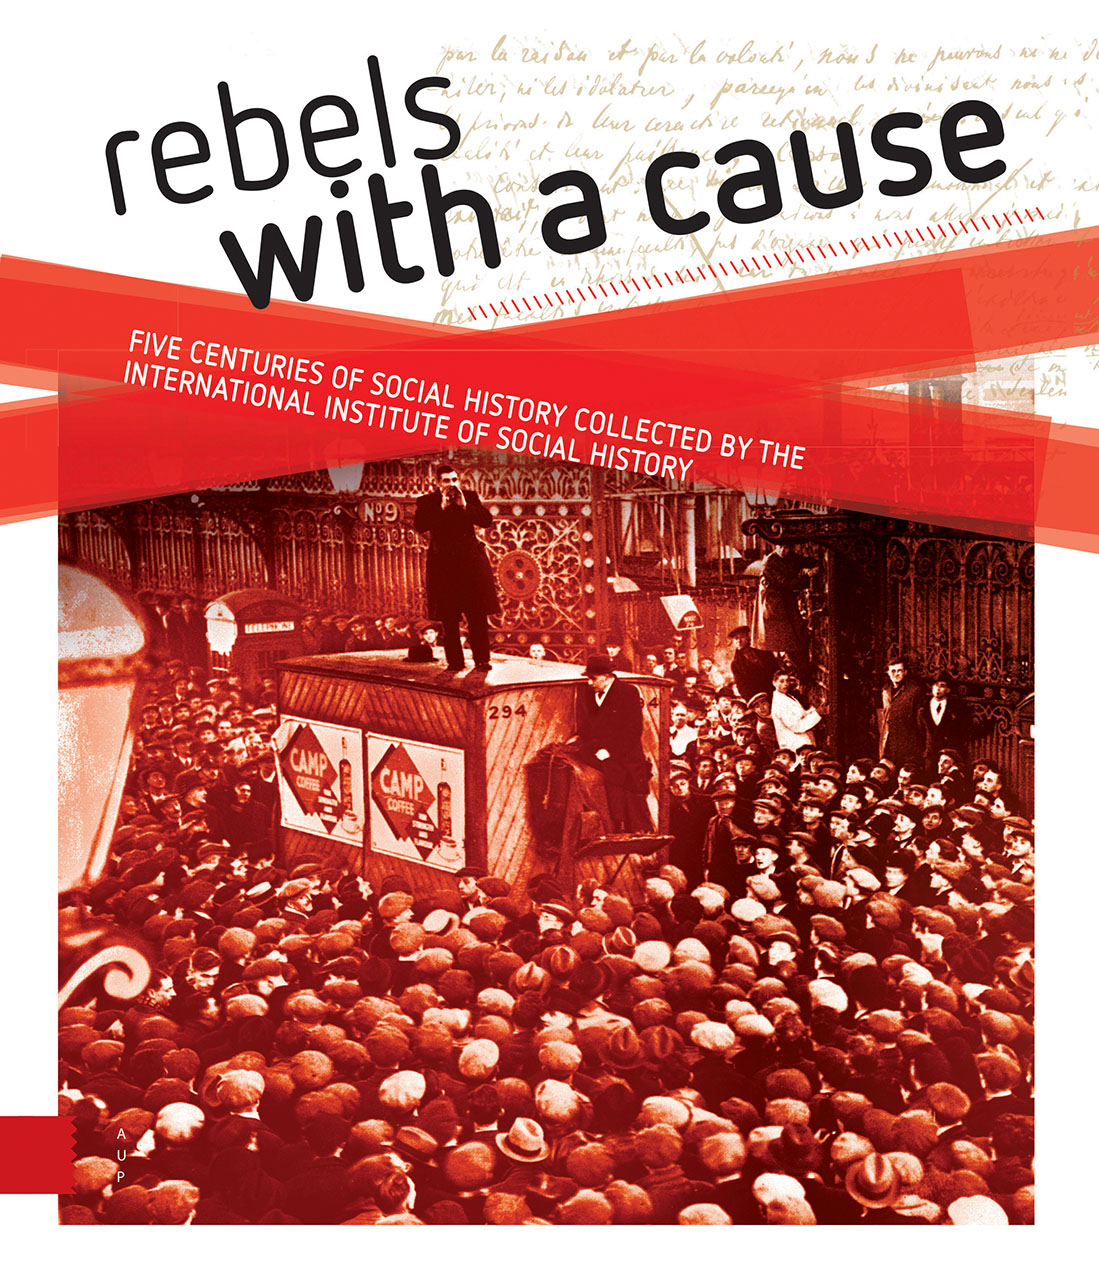 Rebels with a cause | Amsterdam University Press